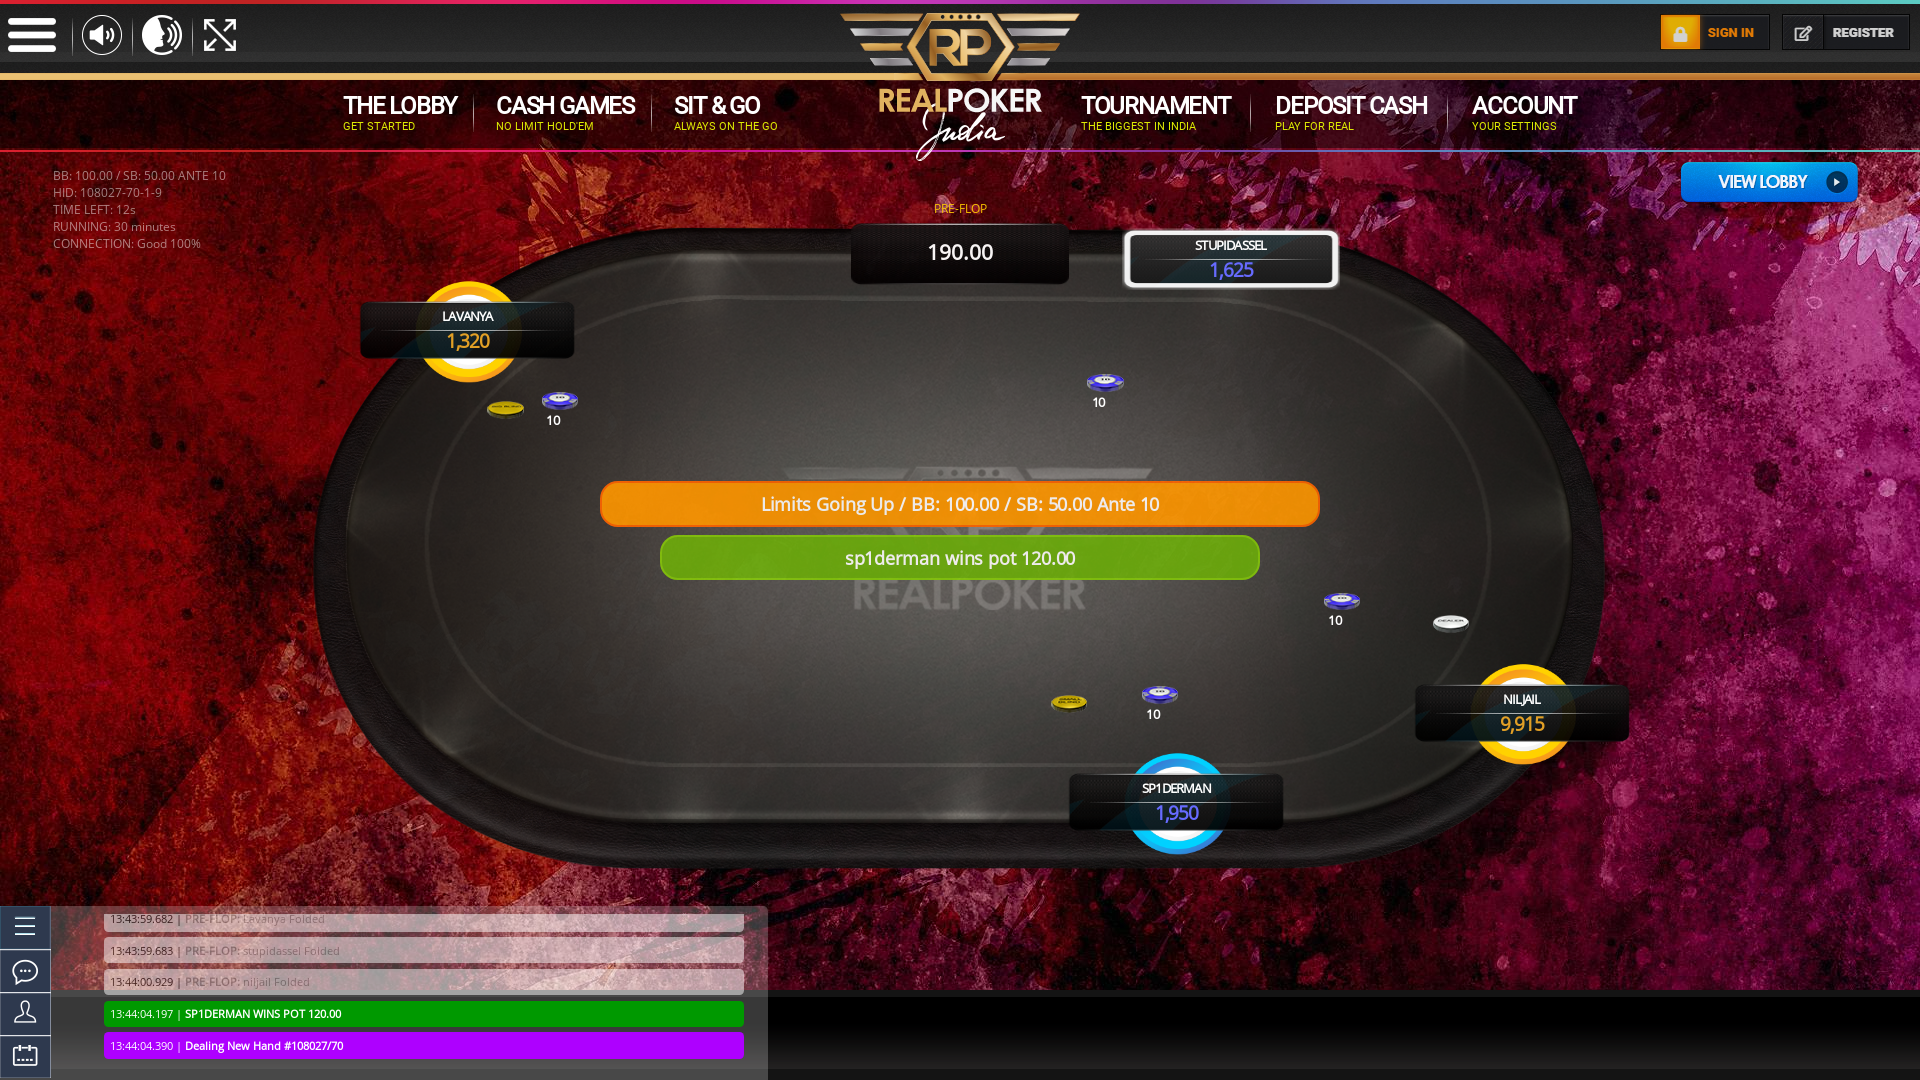 Real poker 10 player table in the 29th minute of the match